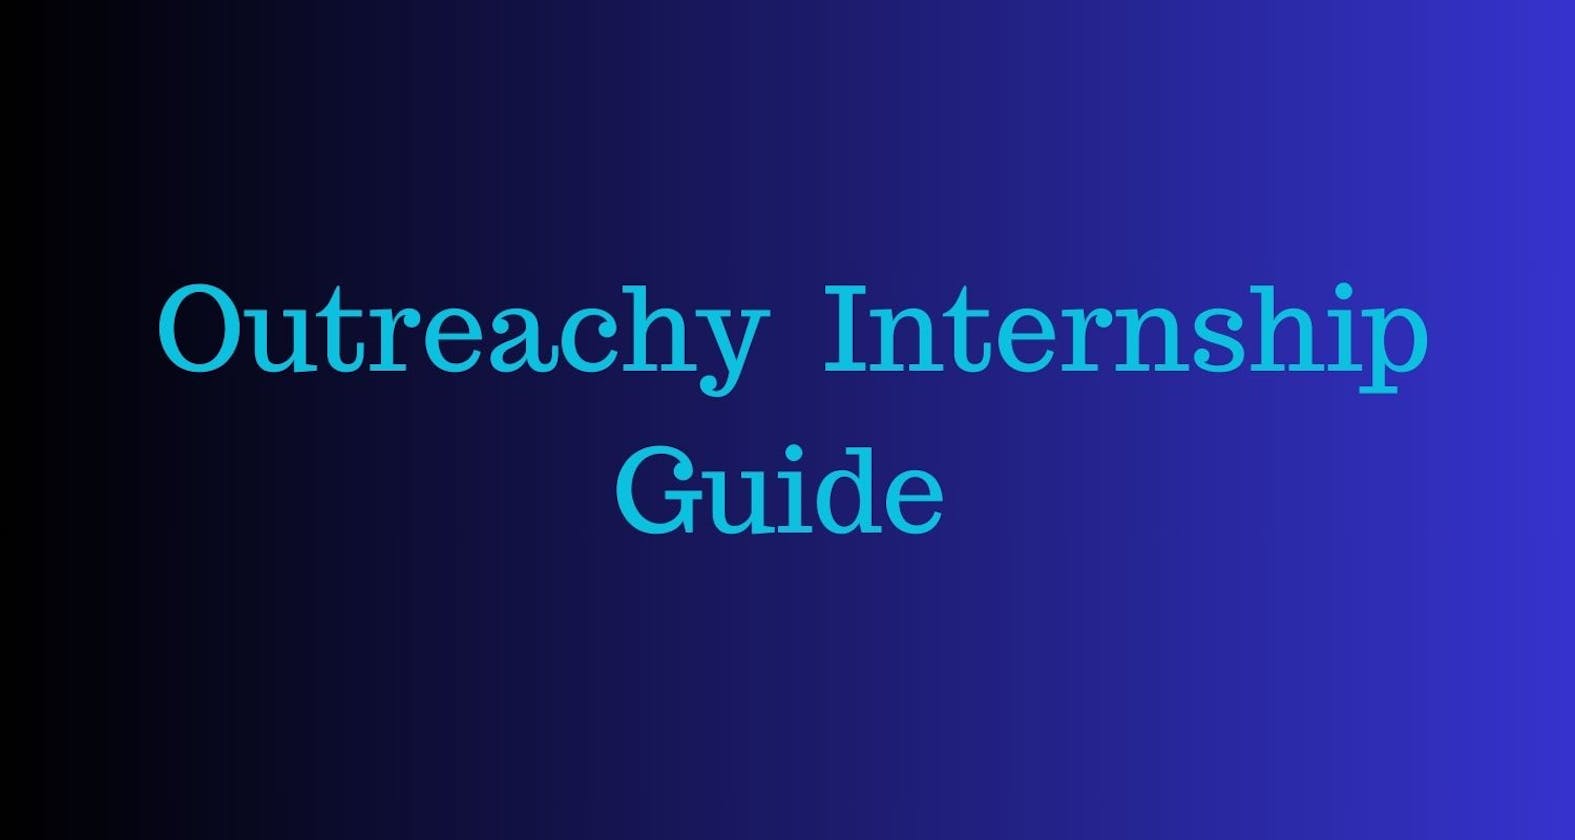 Outreachy Internship: The Ultimate Guide to Understanding the Internship Process